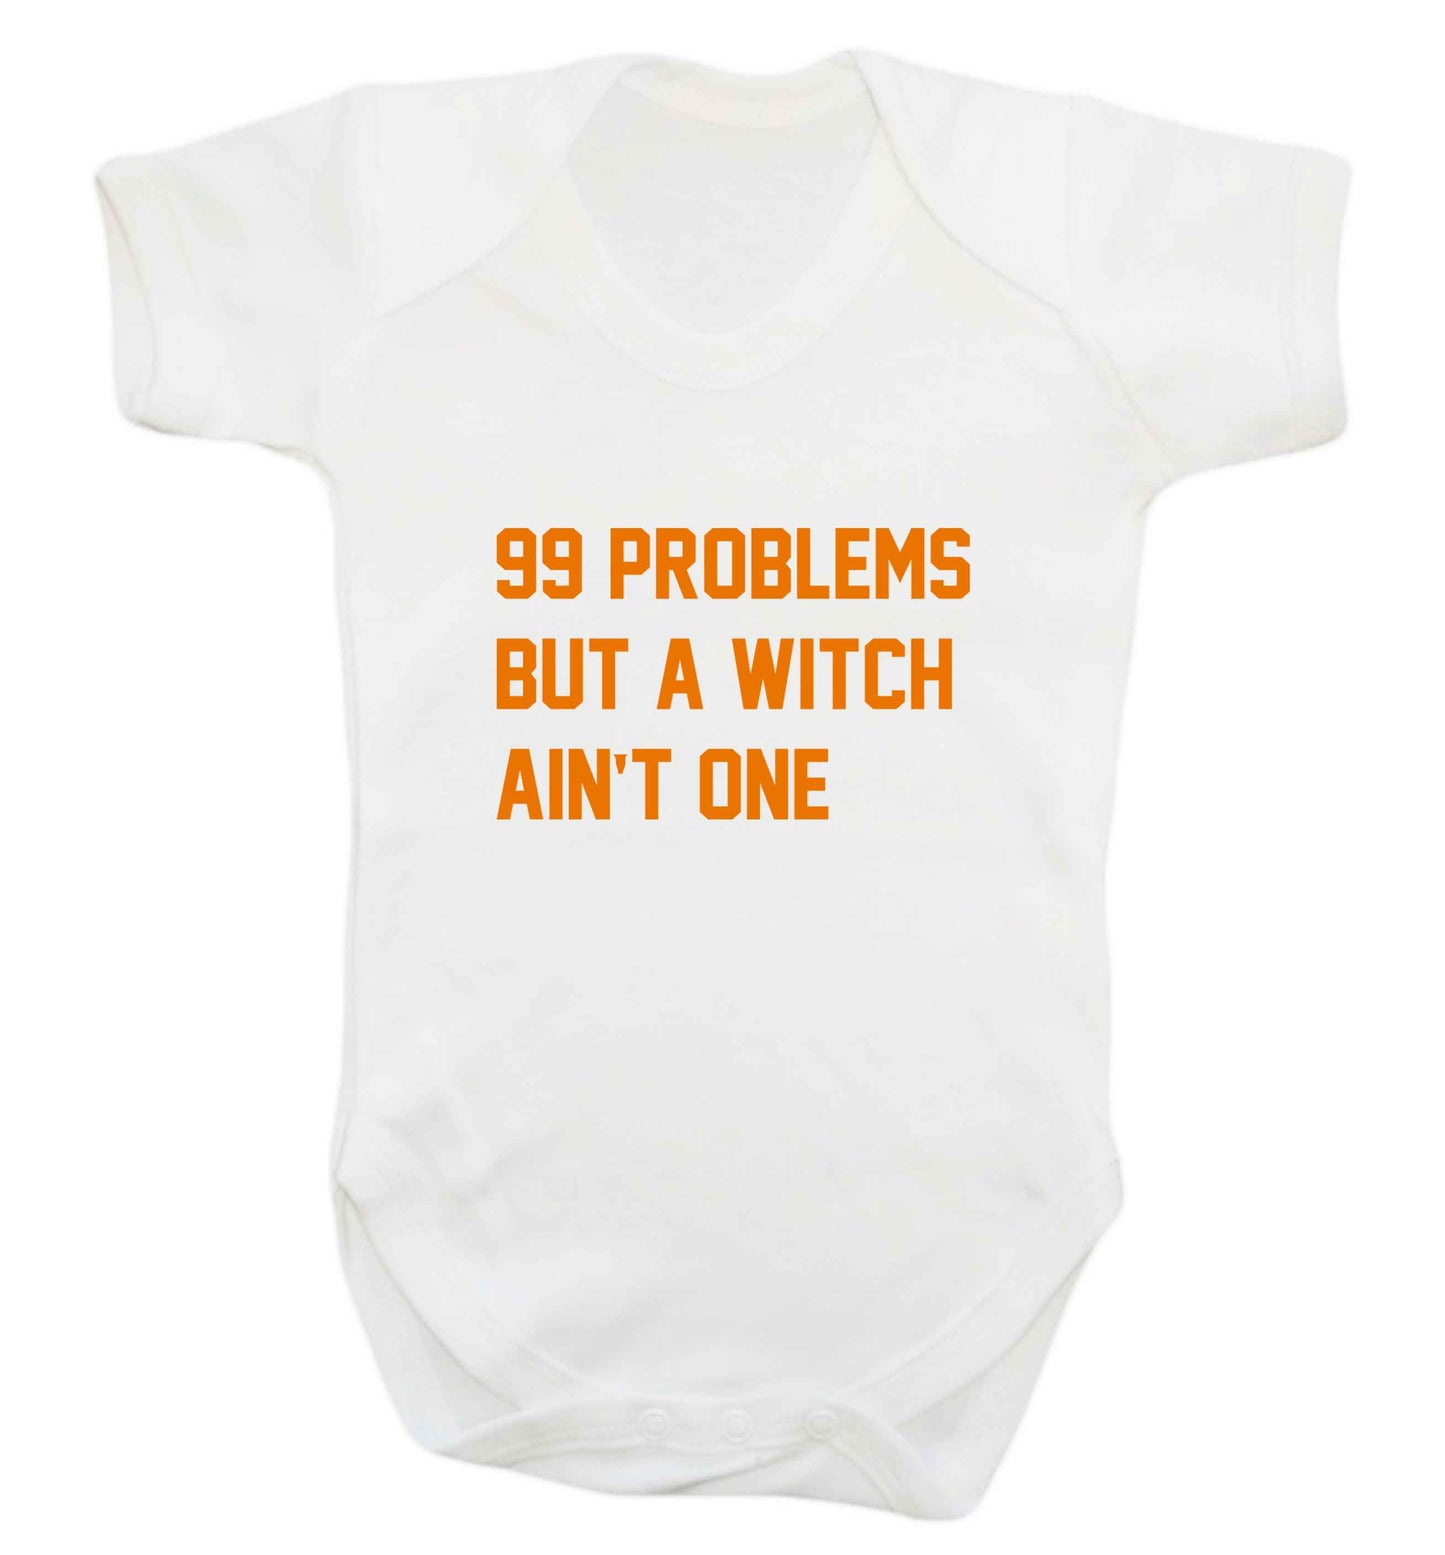 99 Problems but a witch aint one baby vest white 18-24 months